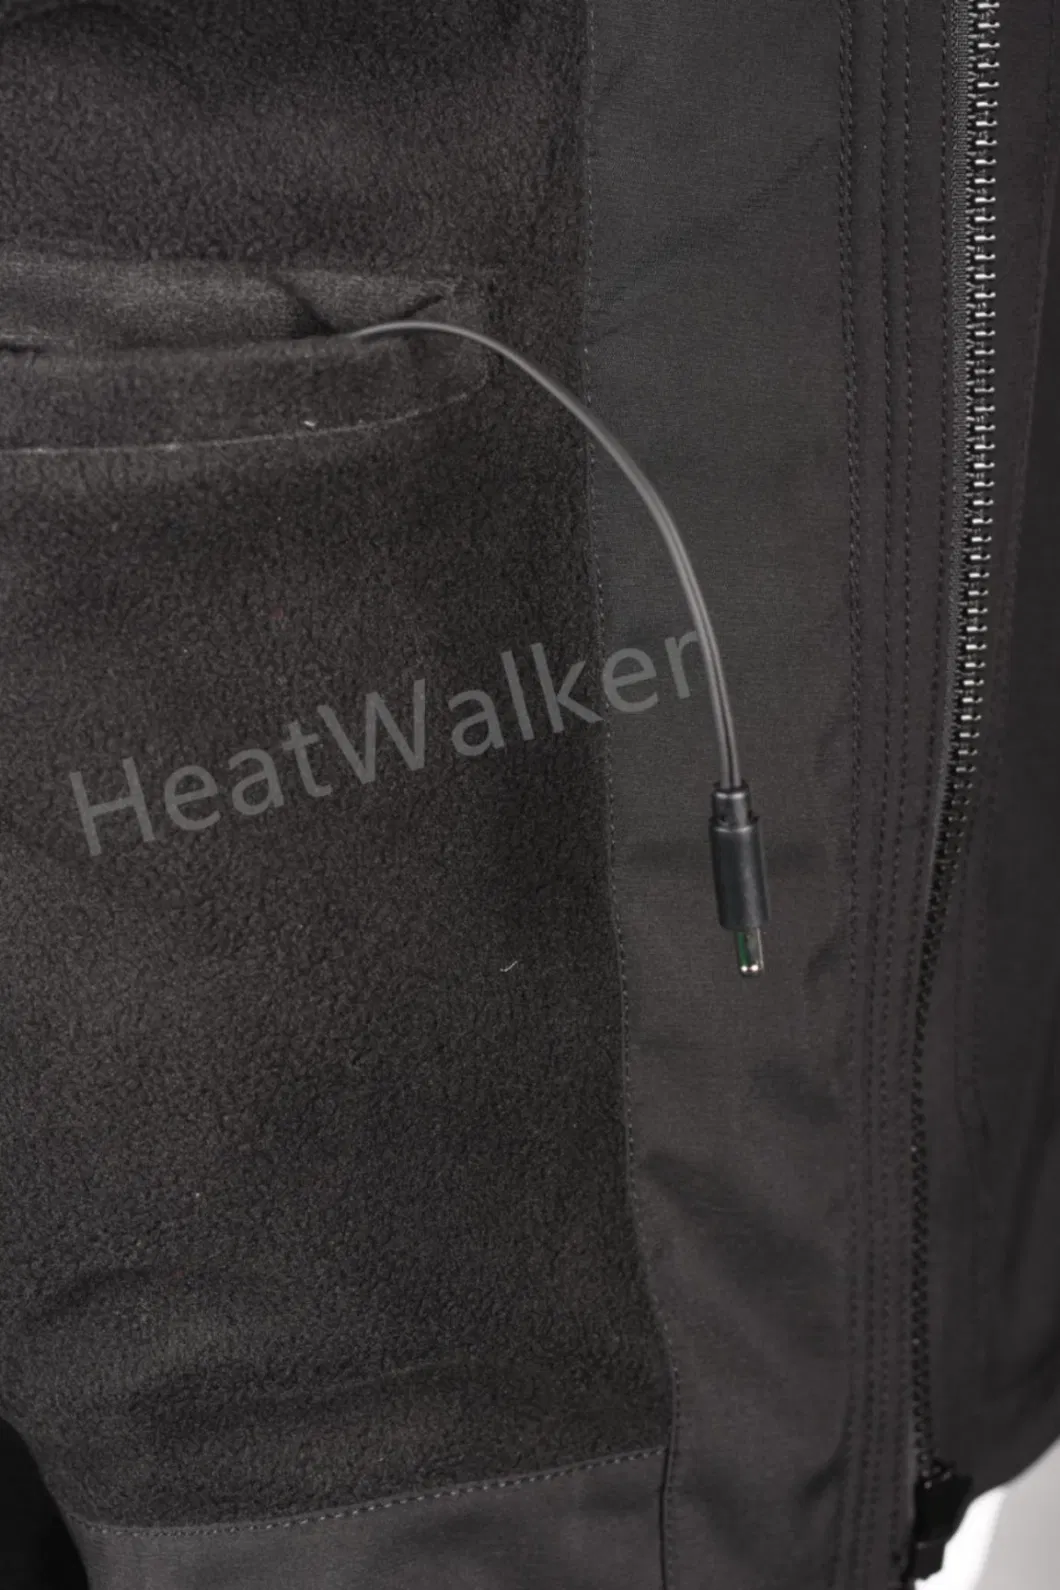 Mobile Warming Heated Jacket for Motorcycling Hunting